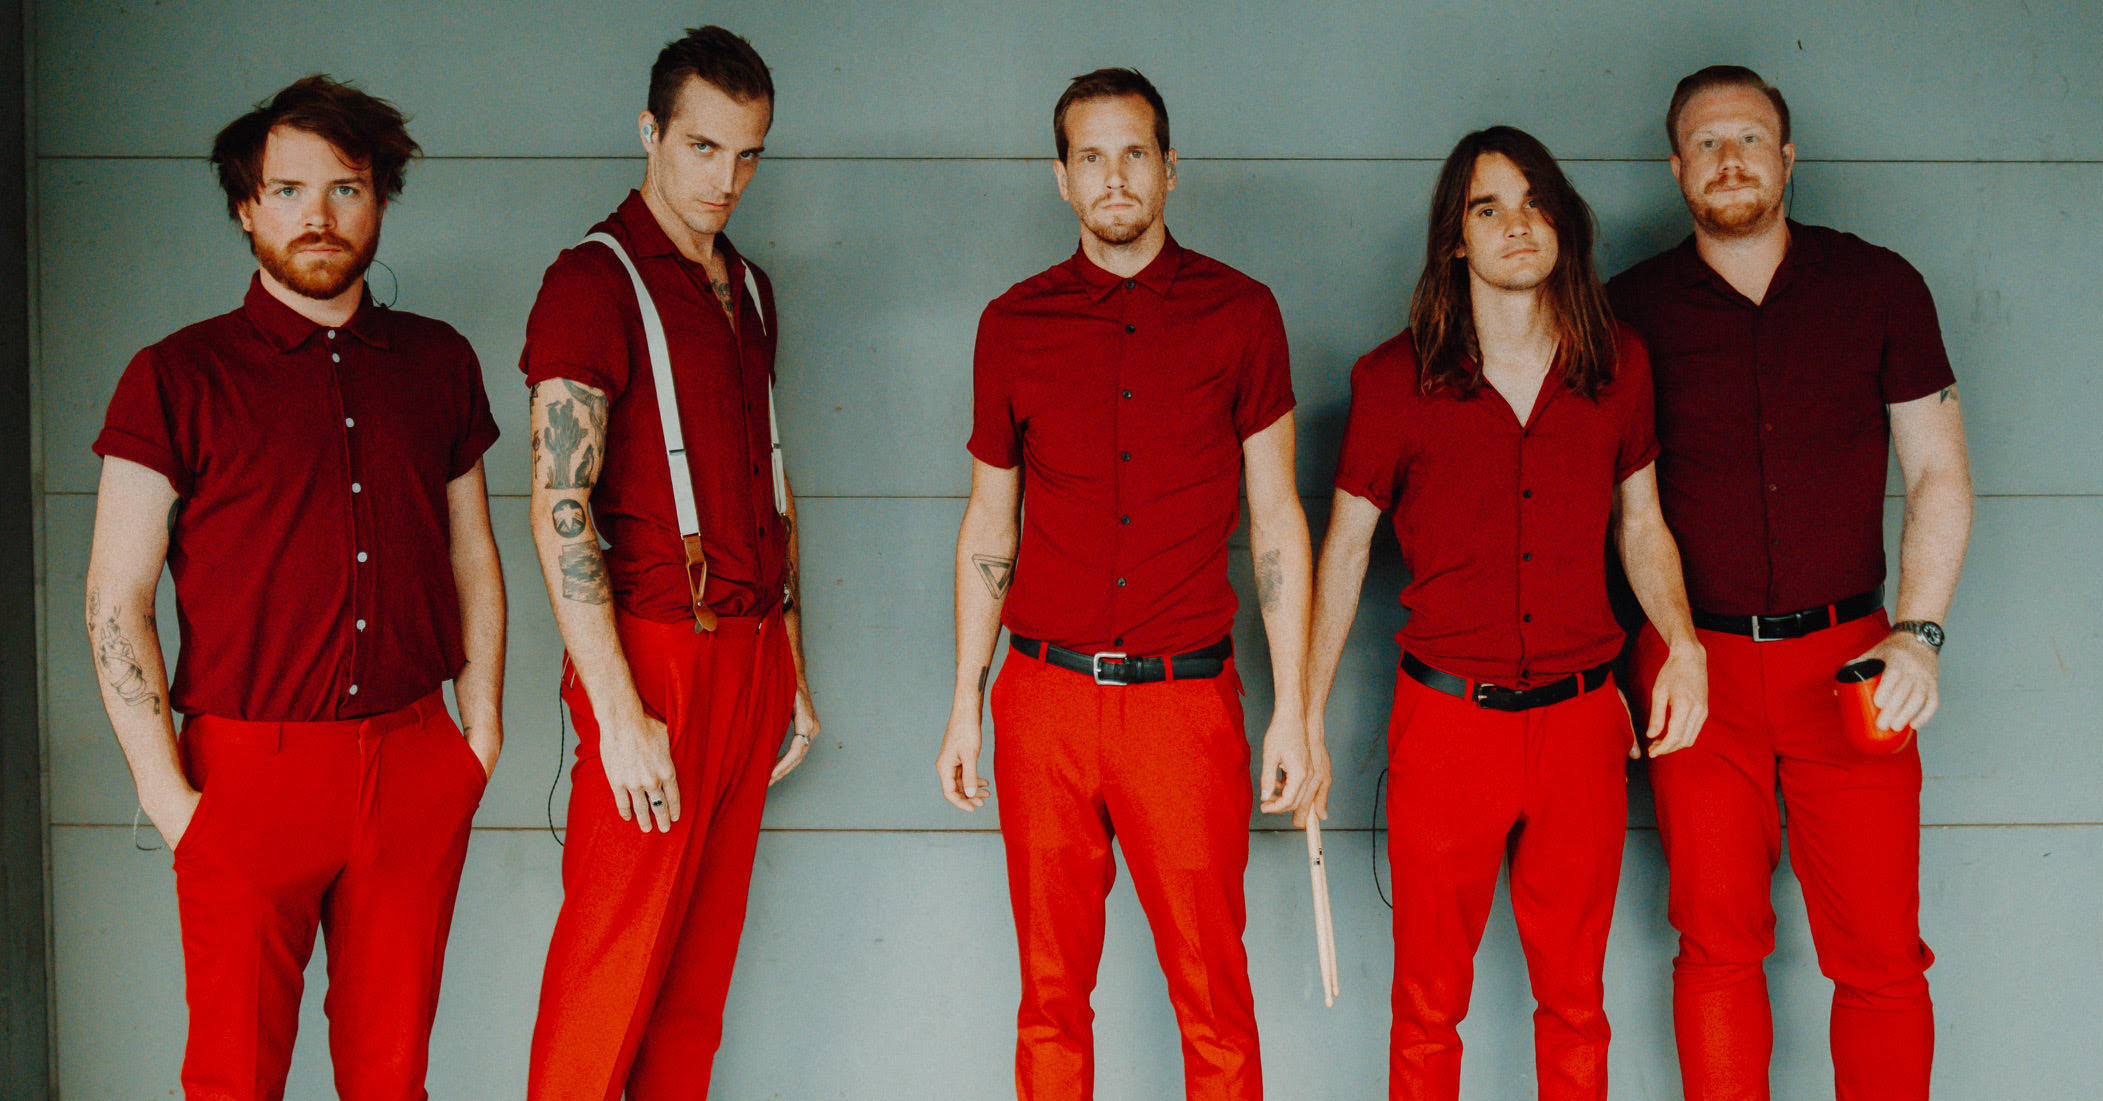 HD wallpaper, Desktop Hd The Maine Band Background Image, 2110X1110 Hd Desktop, Funeral For Lovely Little Lonely, The Maine